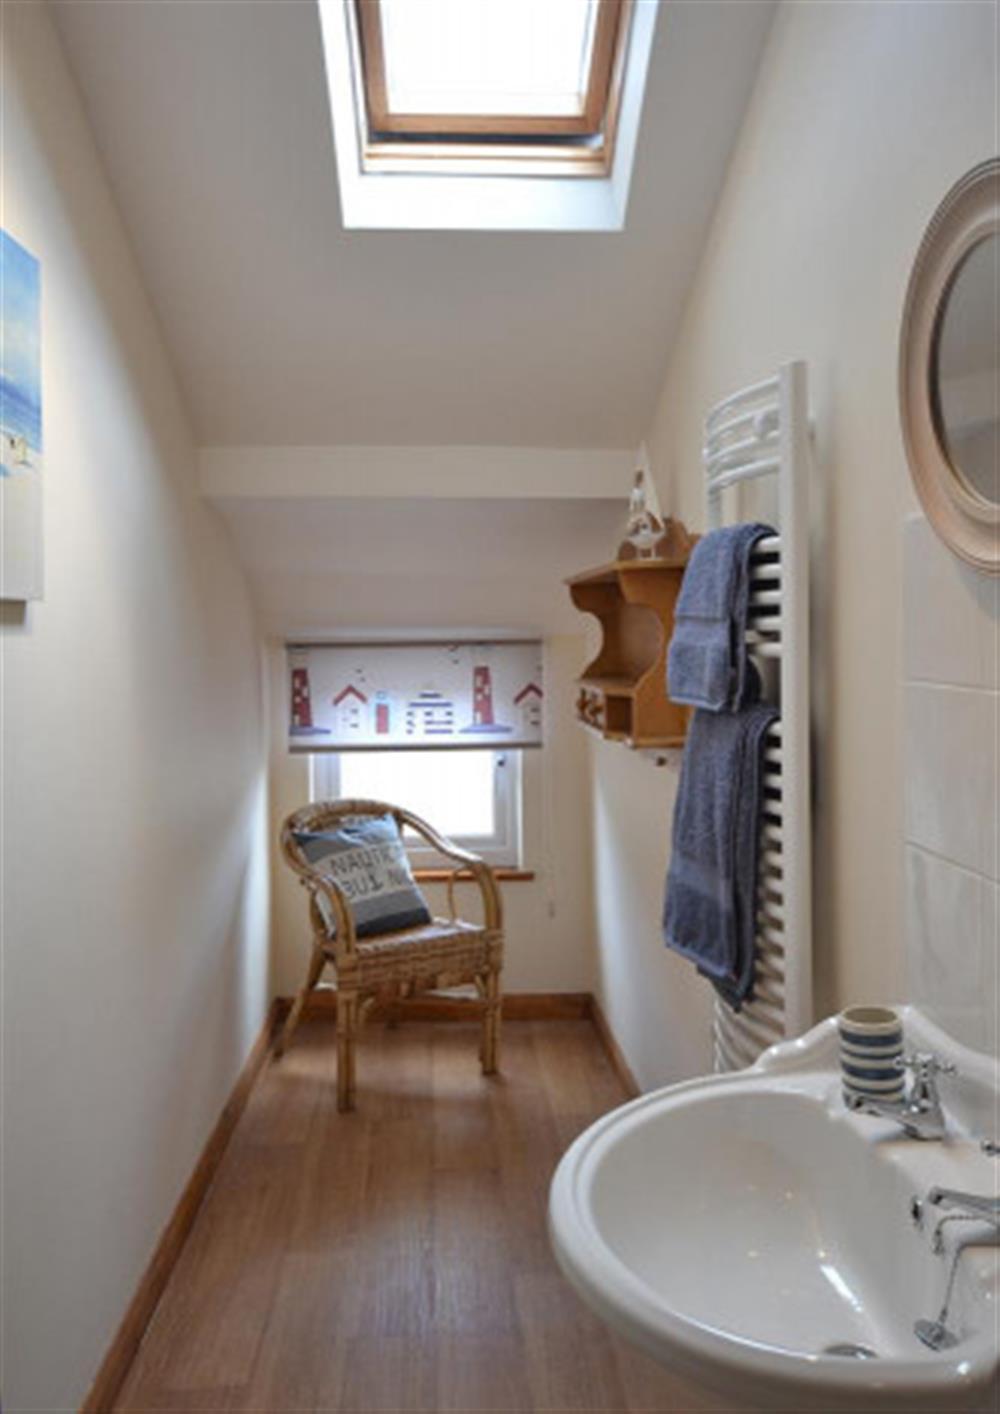 The bright and roomy shower room. at The Old Bakehouse in Looe